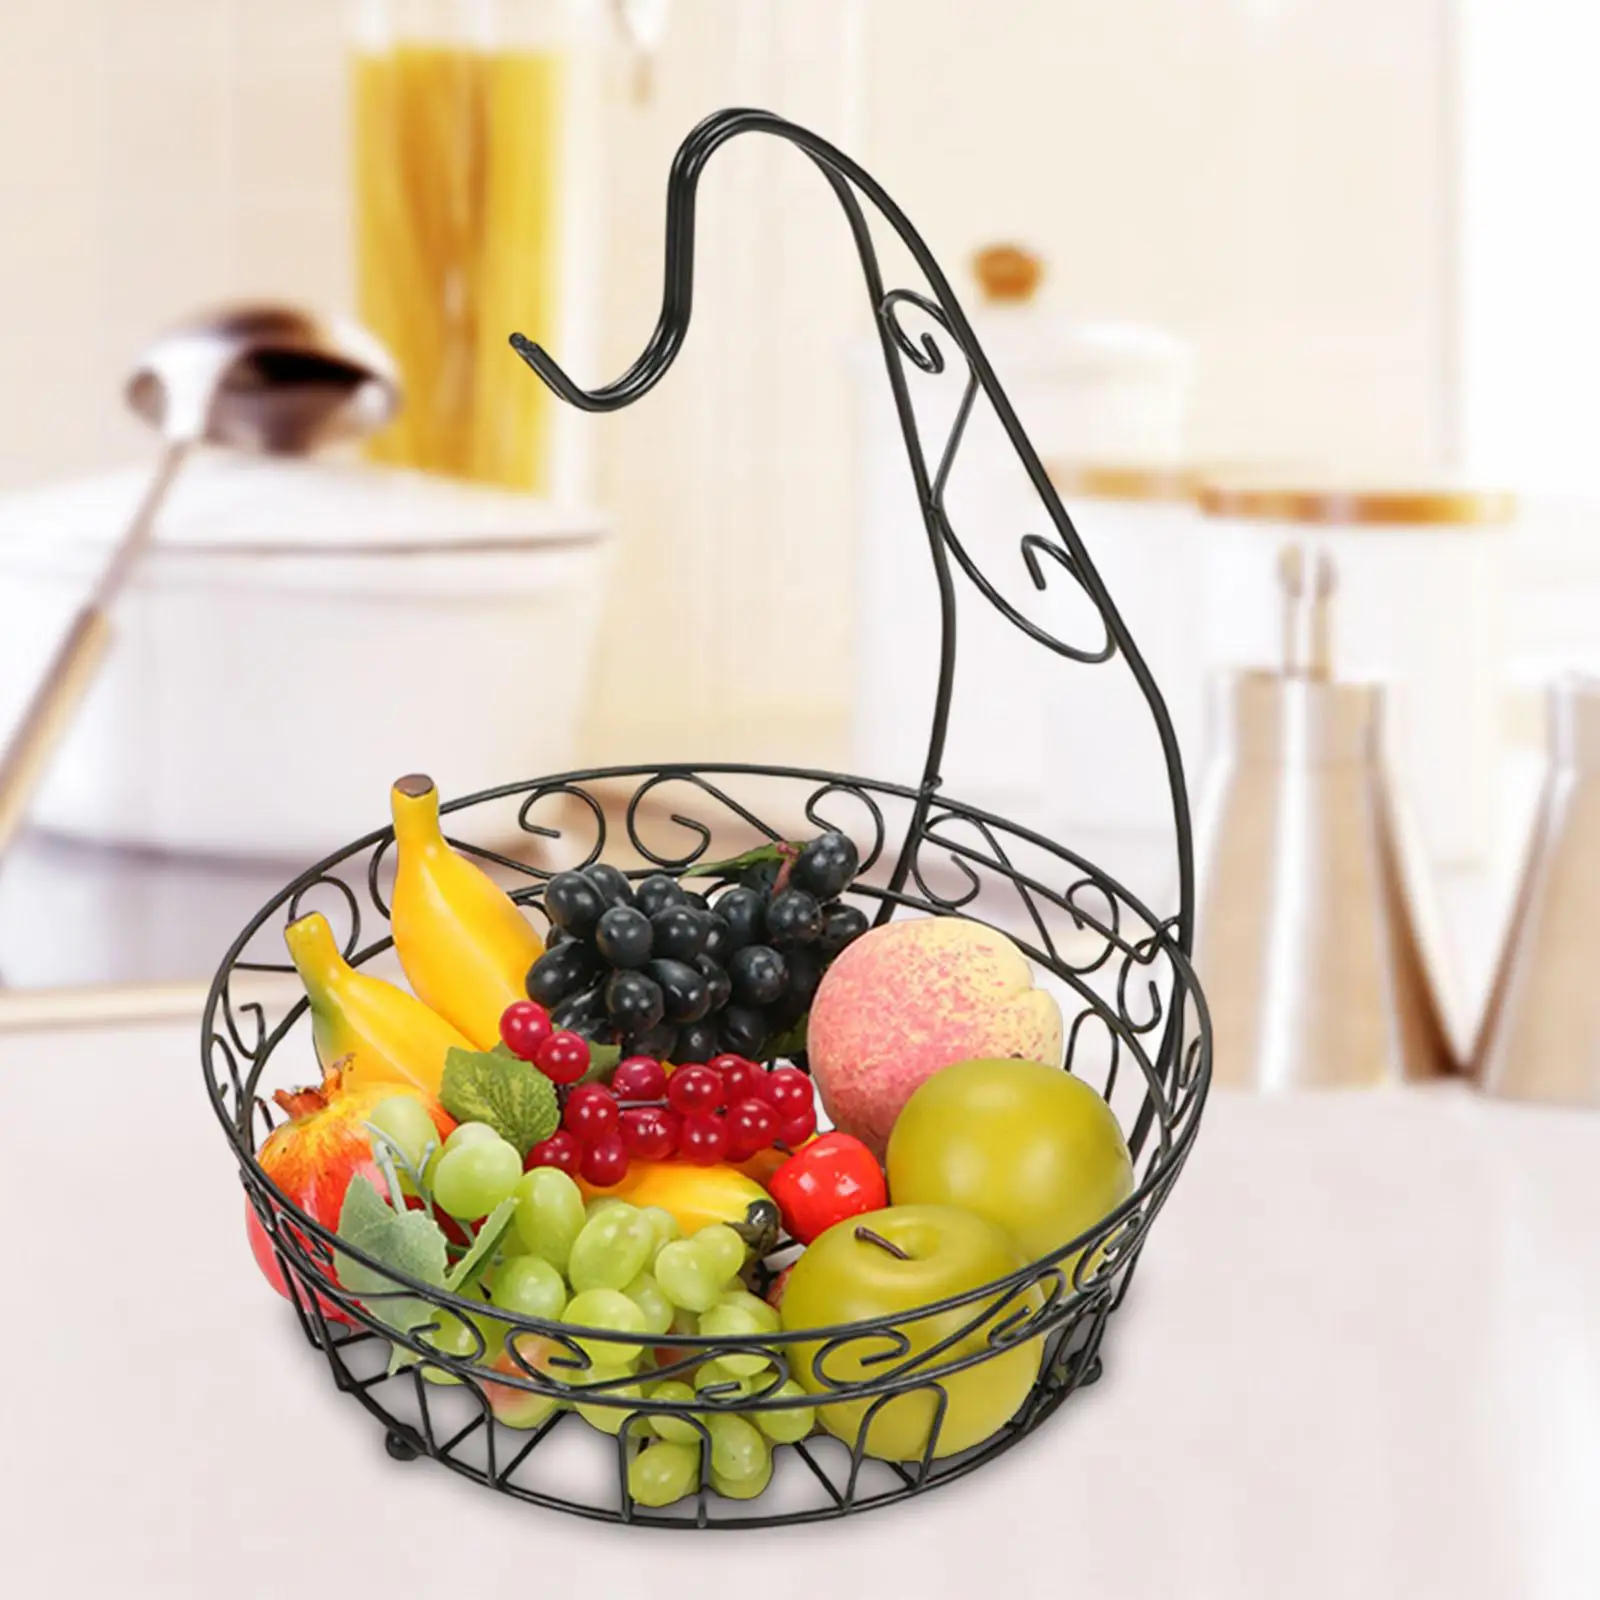 Rustic Metal Fruit Bowl with Banana Holder Detachable Open Design for Kitchen Table Breathable Black Decorative Sturdy